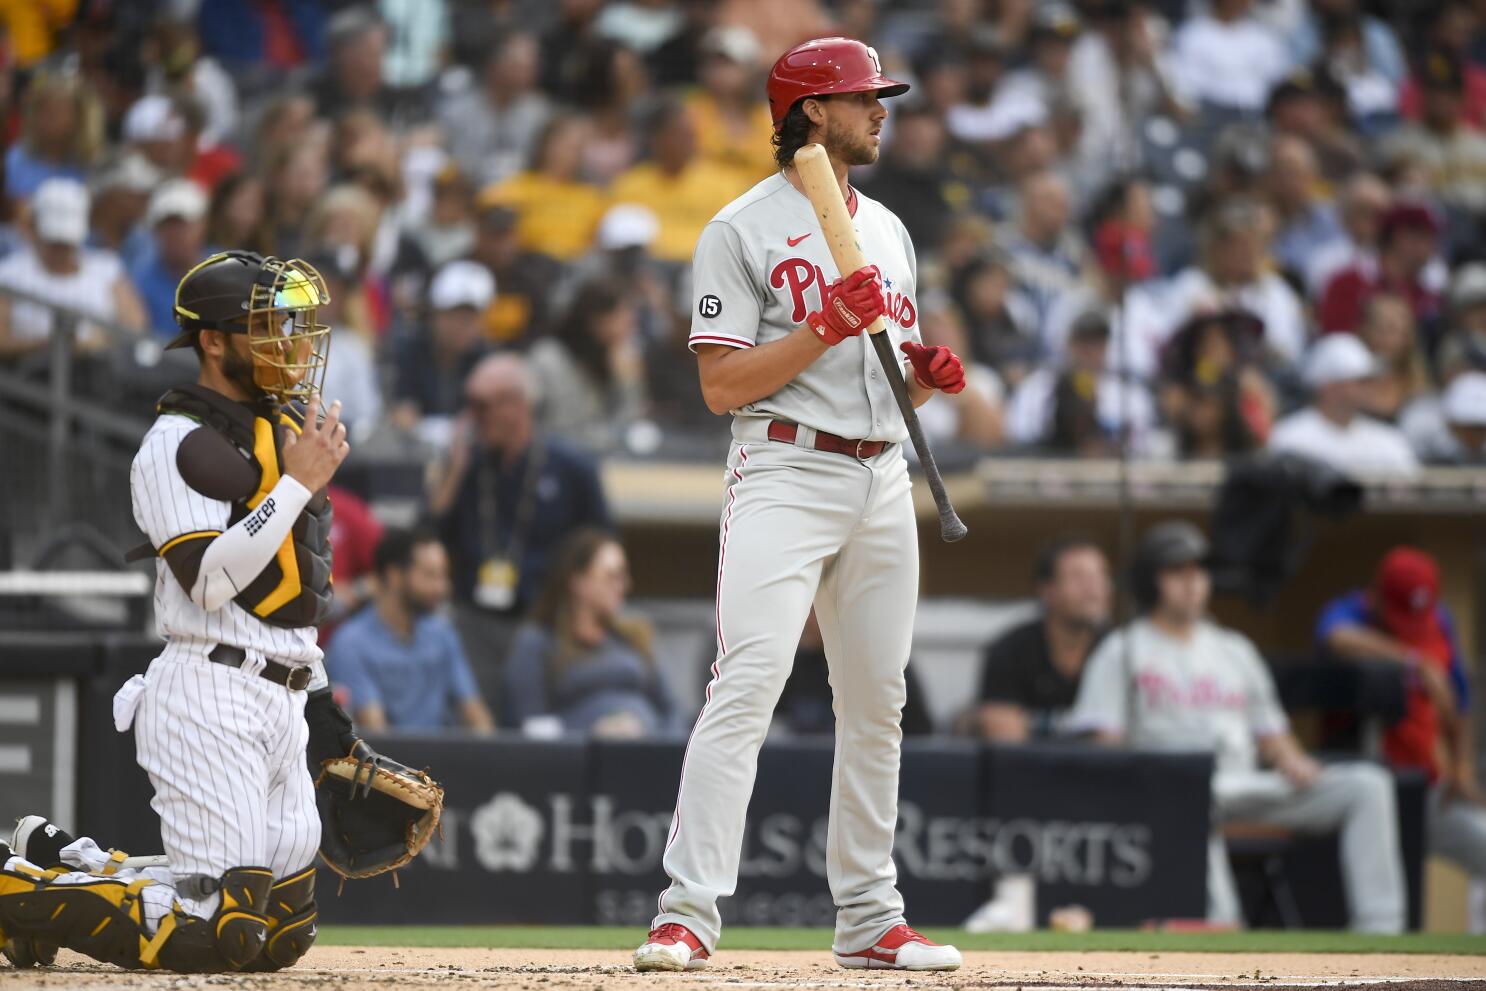 Phillies defeat Padres in NLCS opener - WHYY